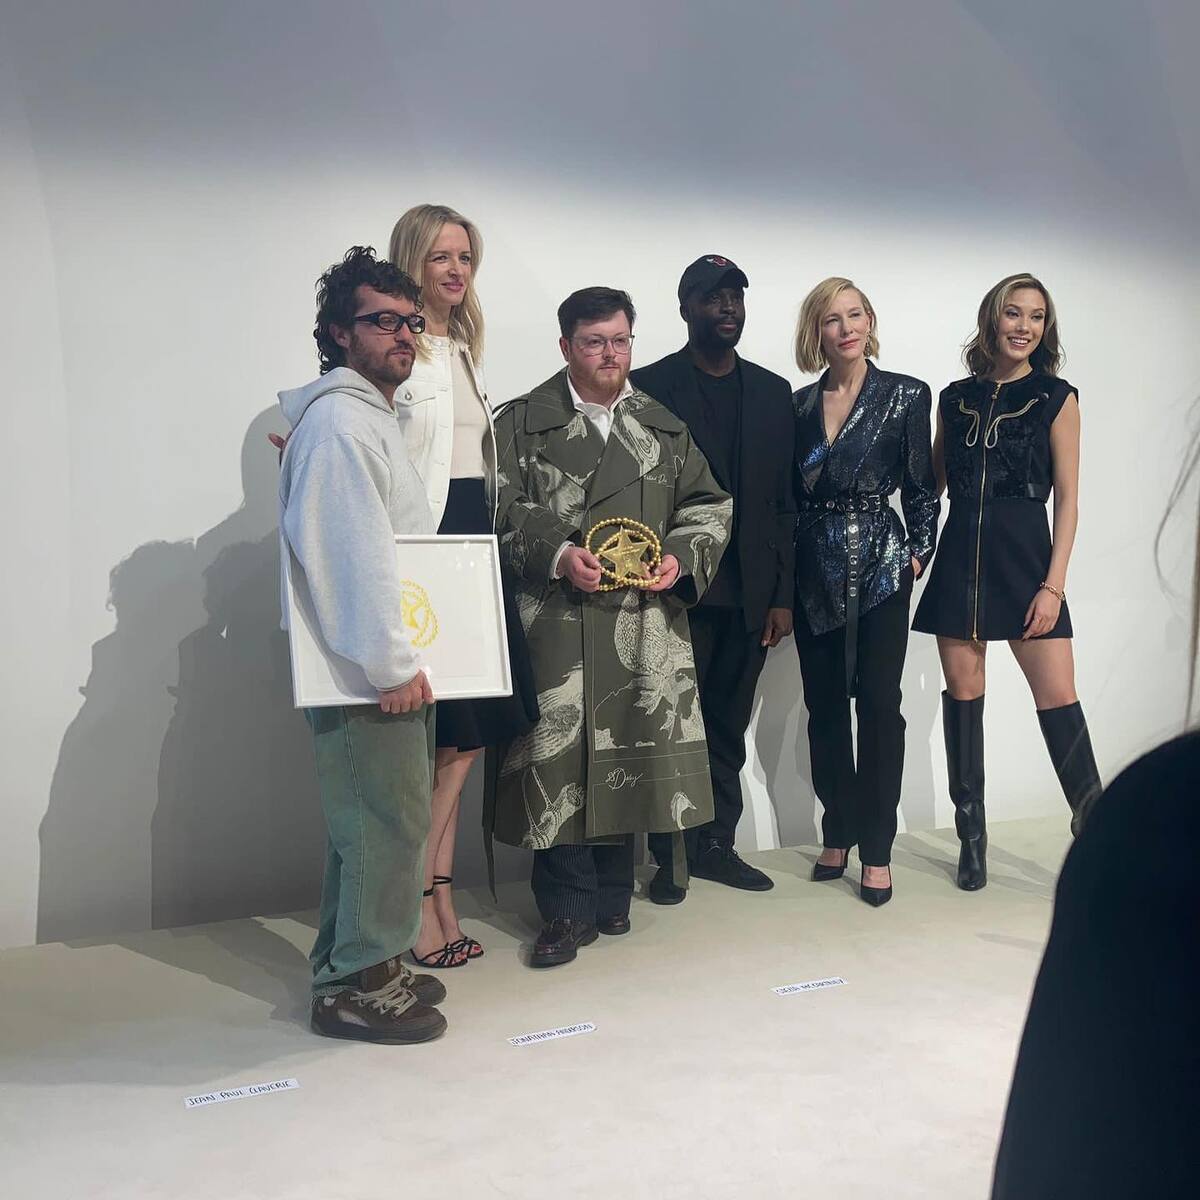 2022 LVMH Prize for Young Fashion Designers Awarded to S.S. Daley